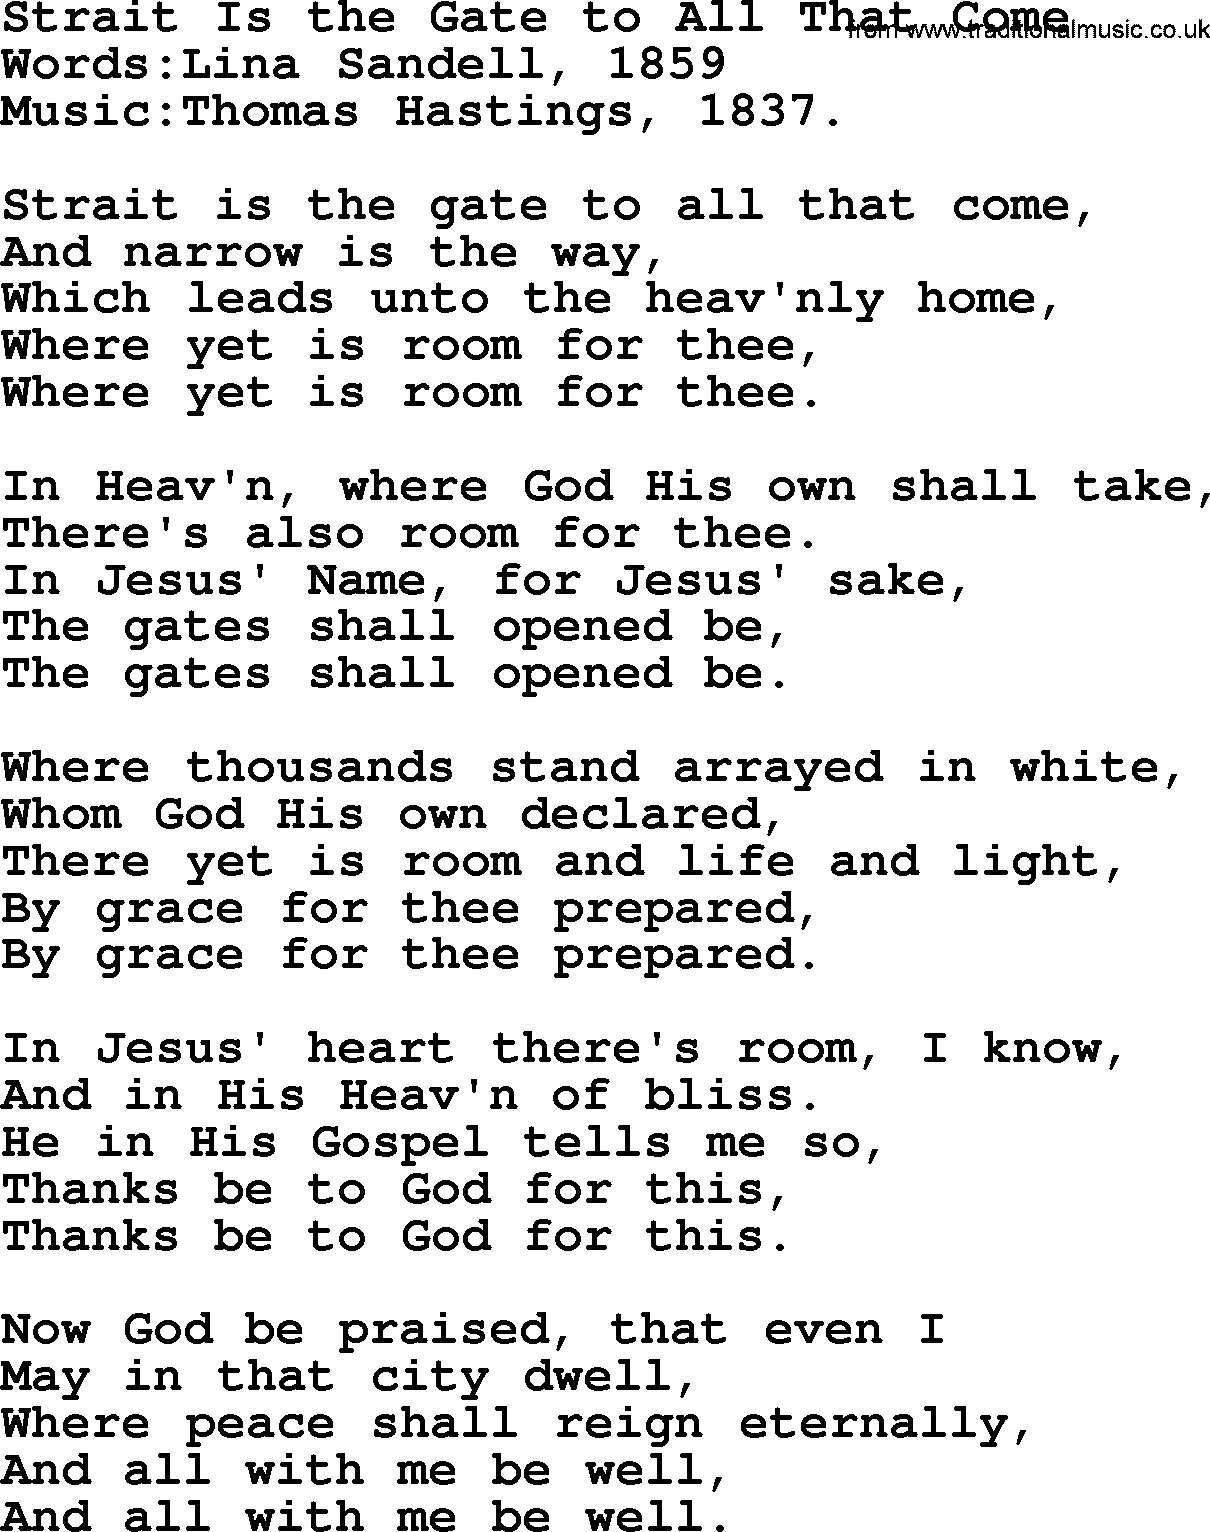 Songs and Hymns about Heaven: Strait Is The Gate To All That Come lyrics with PDF